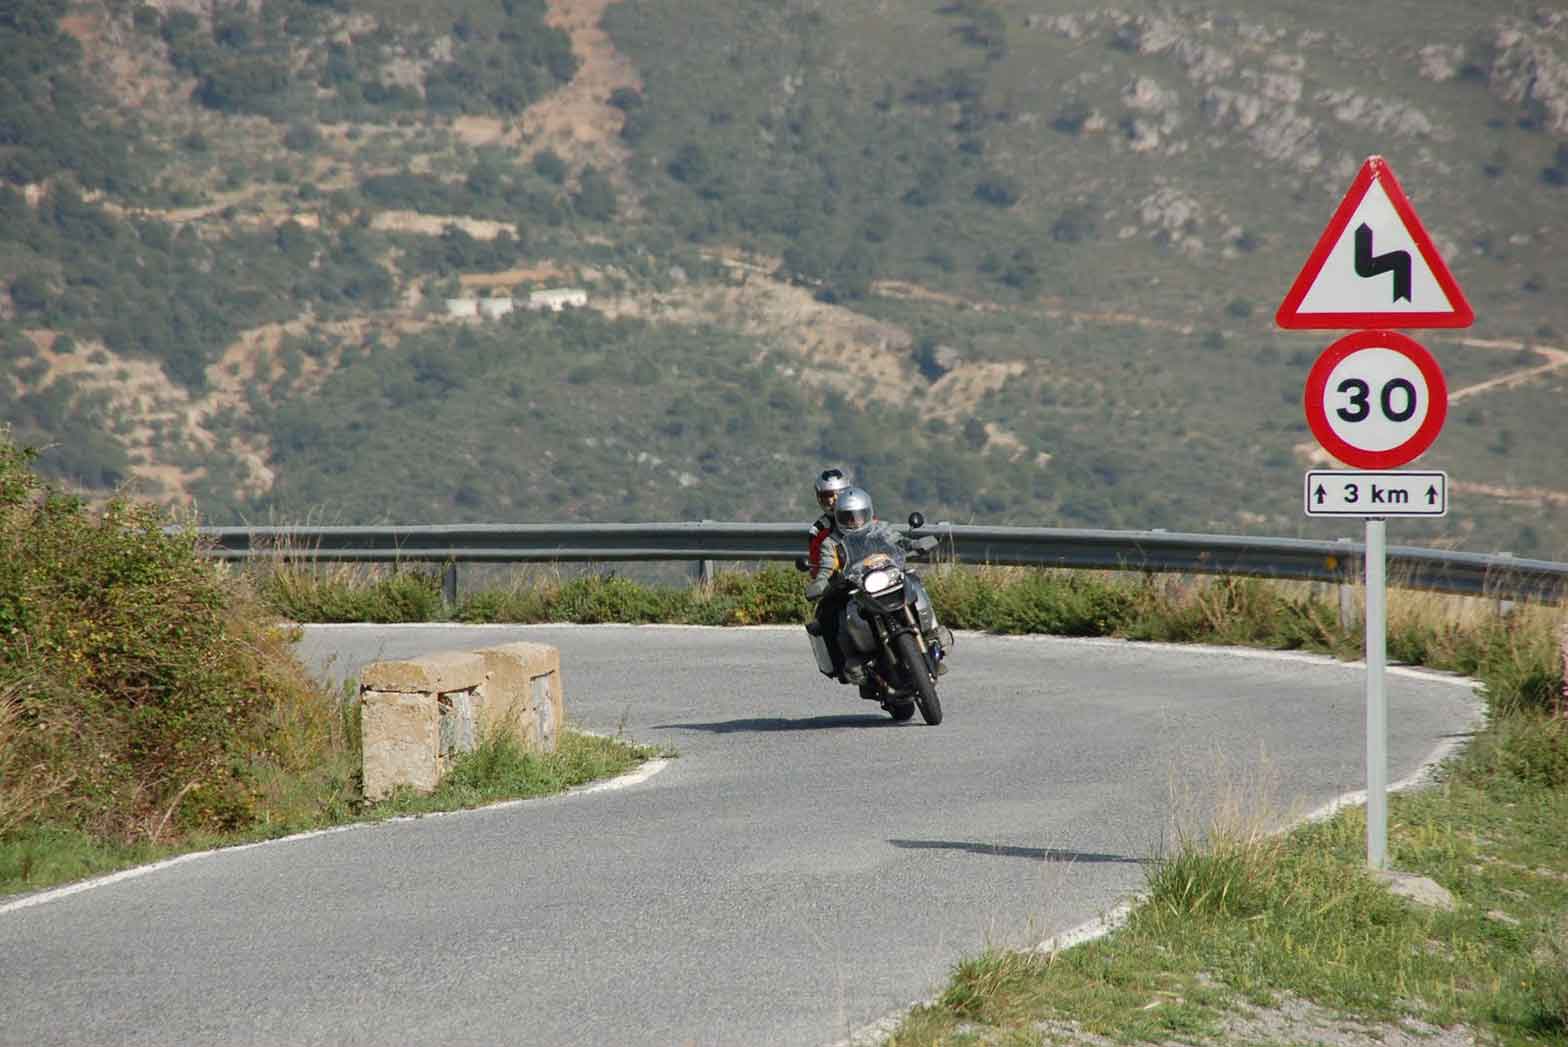 motorcycle tour in spain